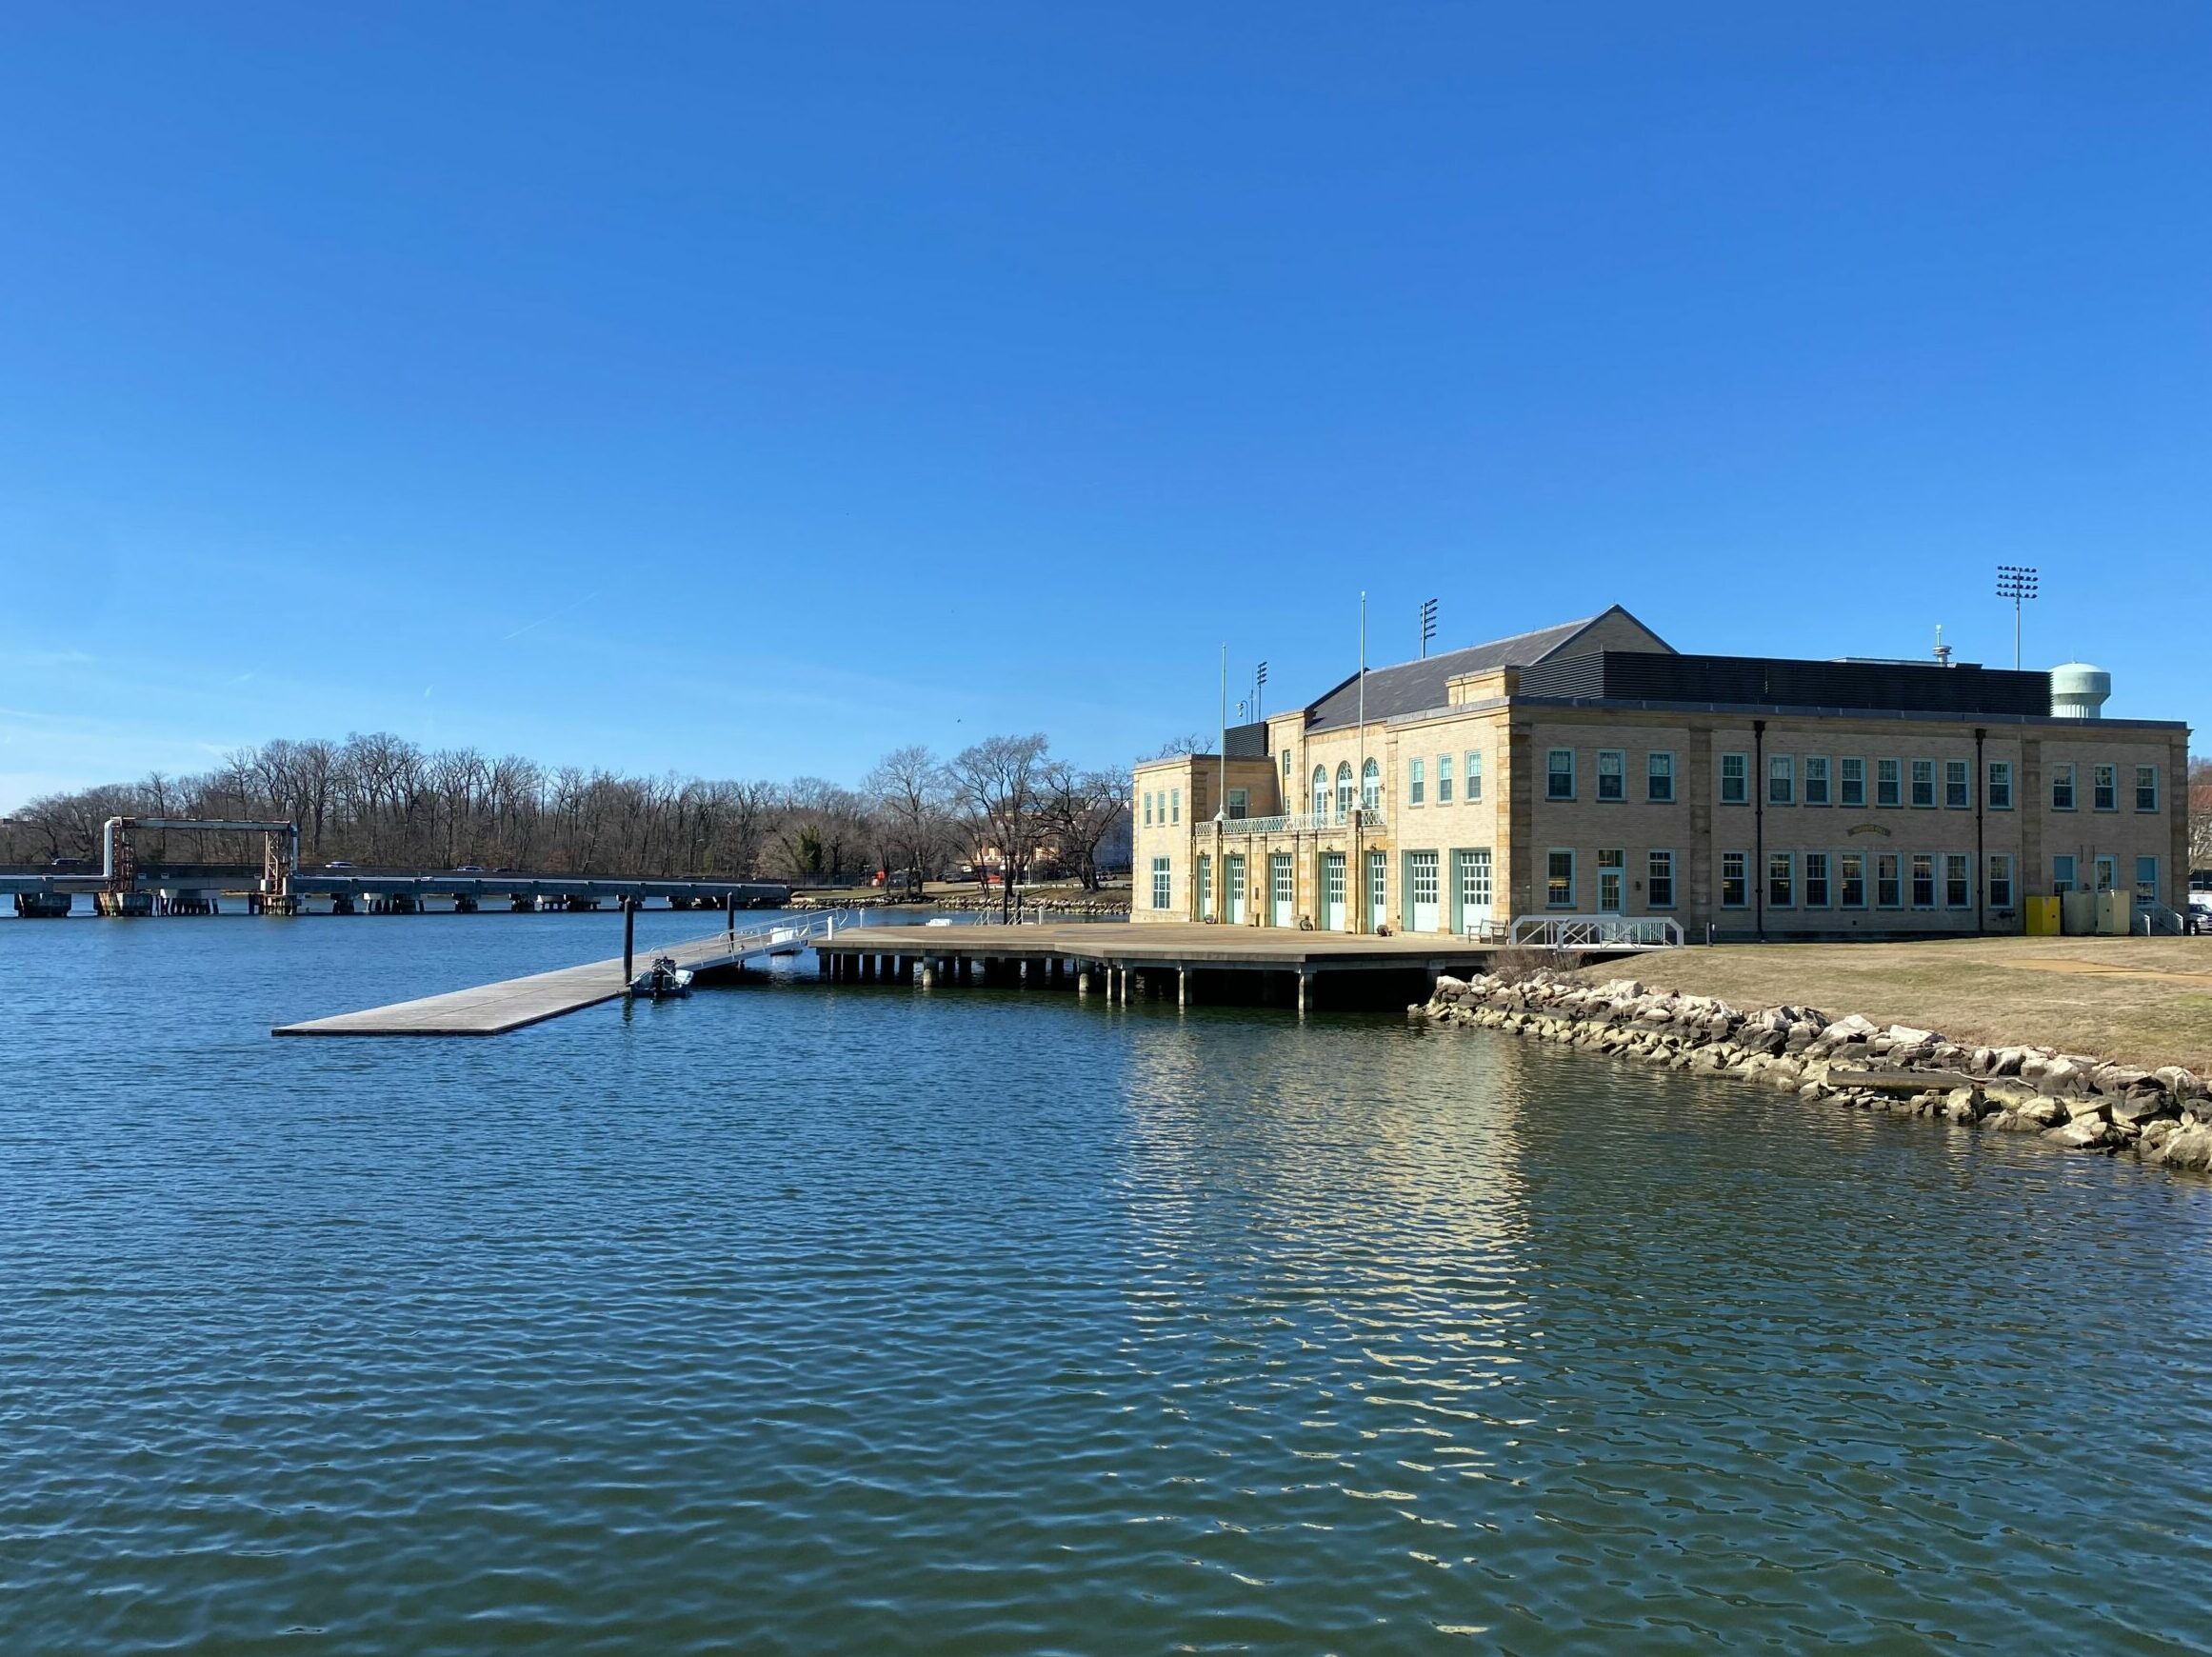 Hubbard Hall, aka the Naval Academy boathouse, Annapolis, Maryland, at midday on Saturday, February 4, 2023.